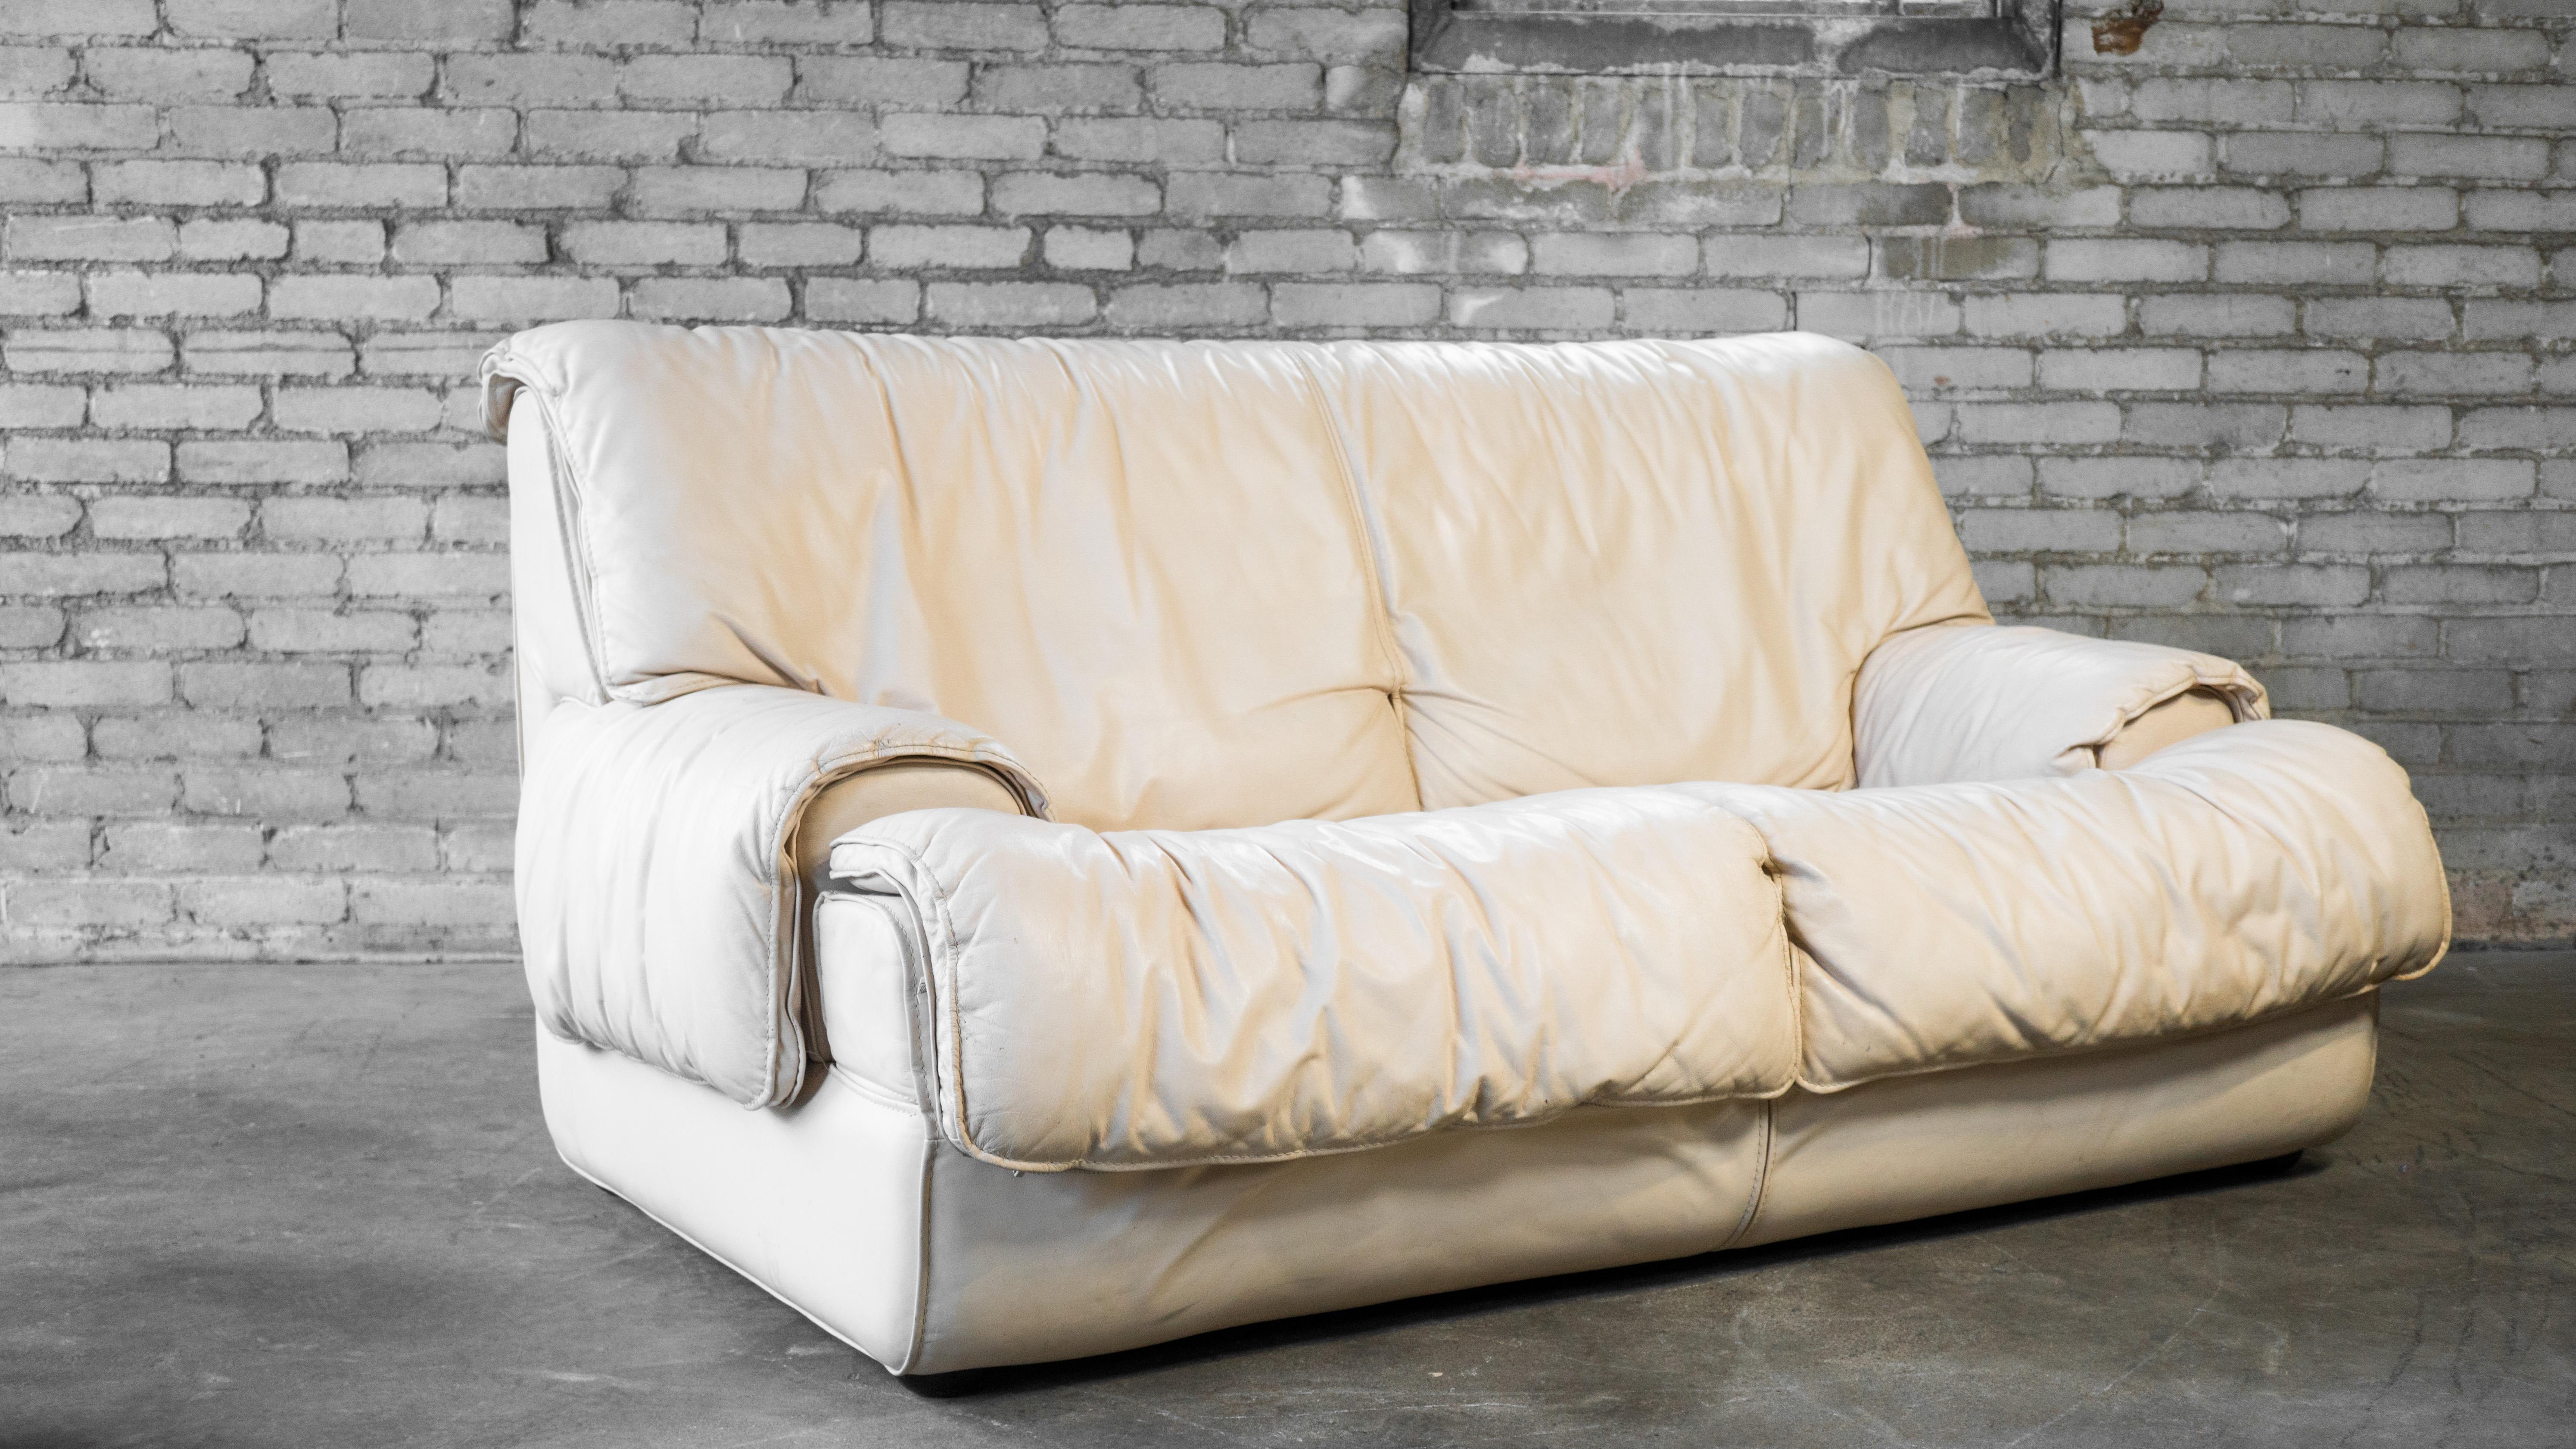 Roche Bobois cream leather loveseat, circa 1980s. Low profile design with thick, soft padding. Leather drapes over arms and backrest for relaxed vibe. Seating is very low to the ground and immersive. Good vintage condition. Manufacturer label